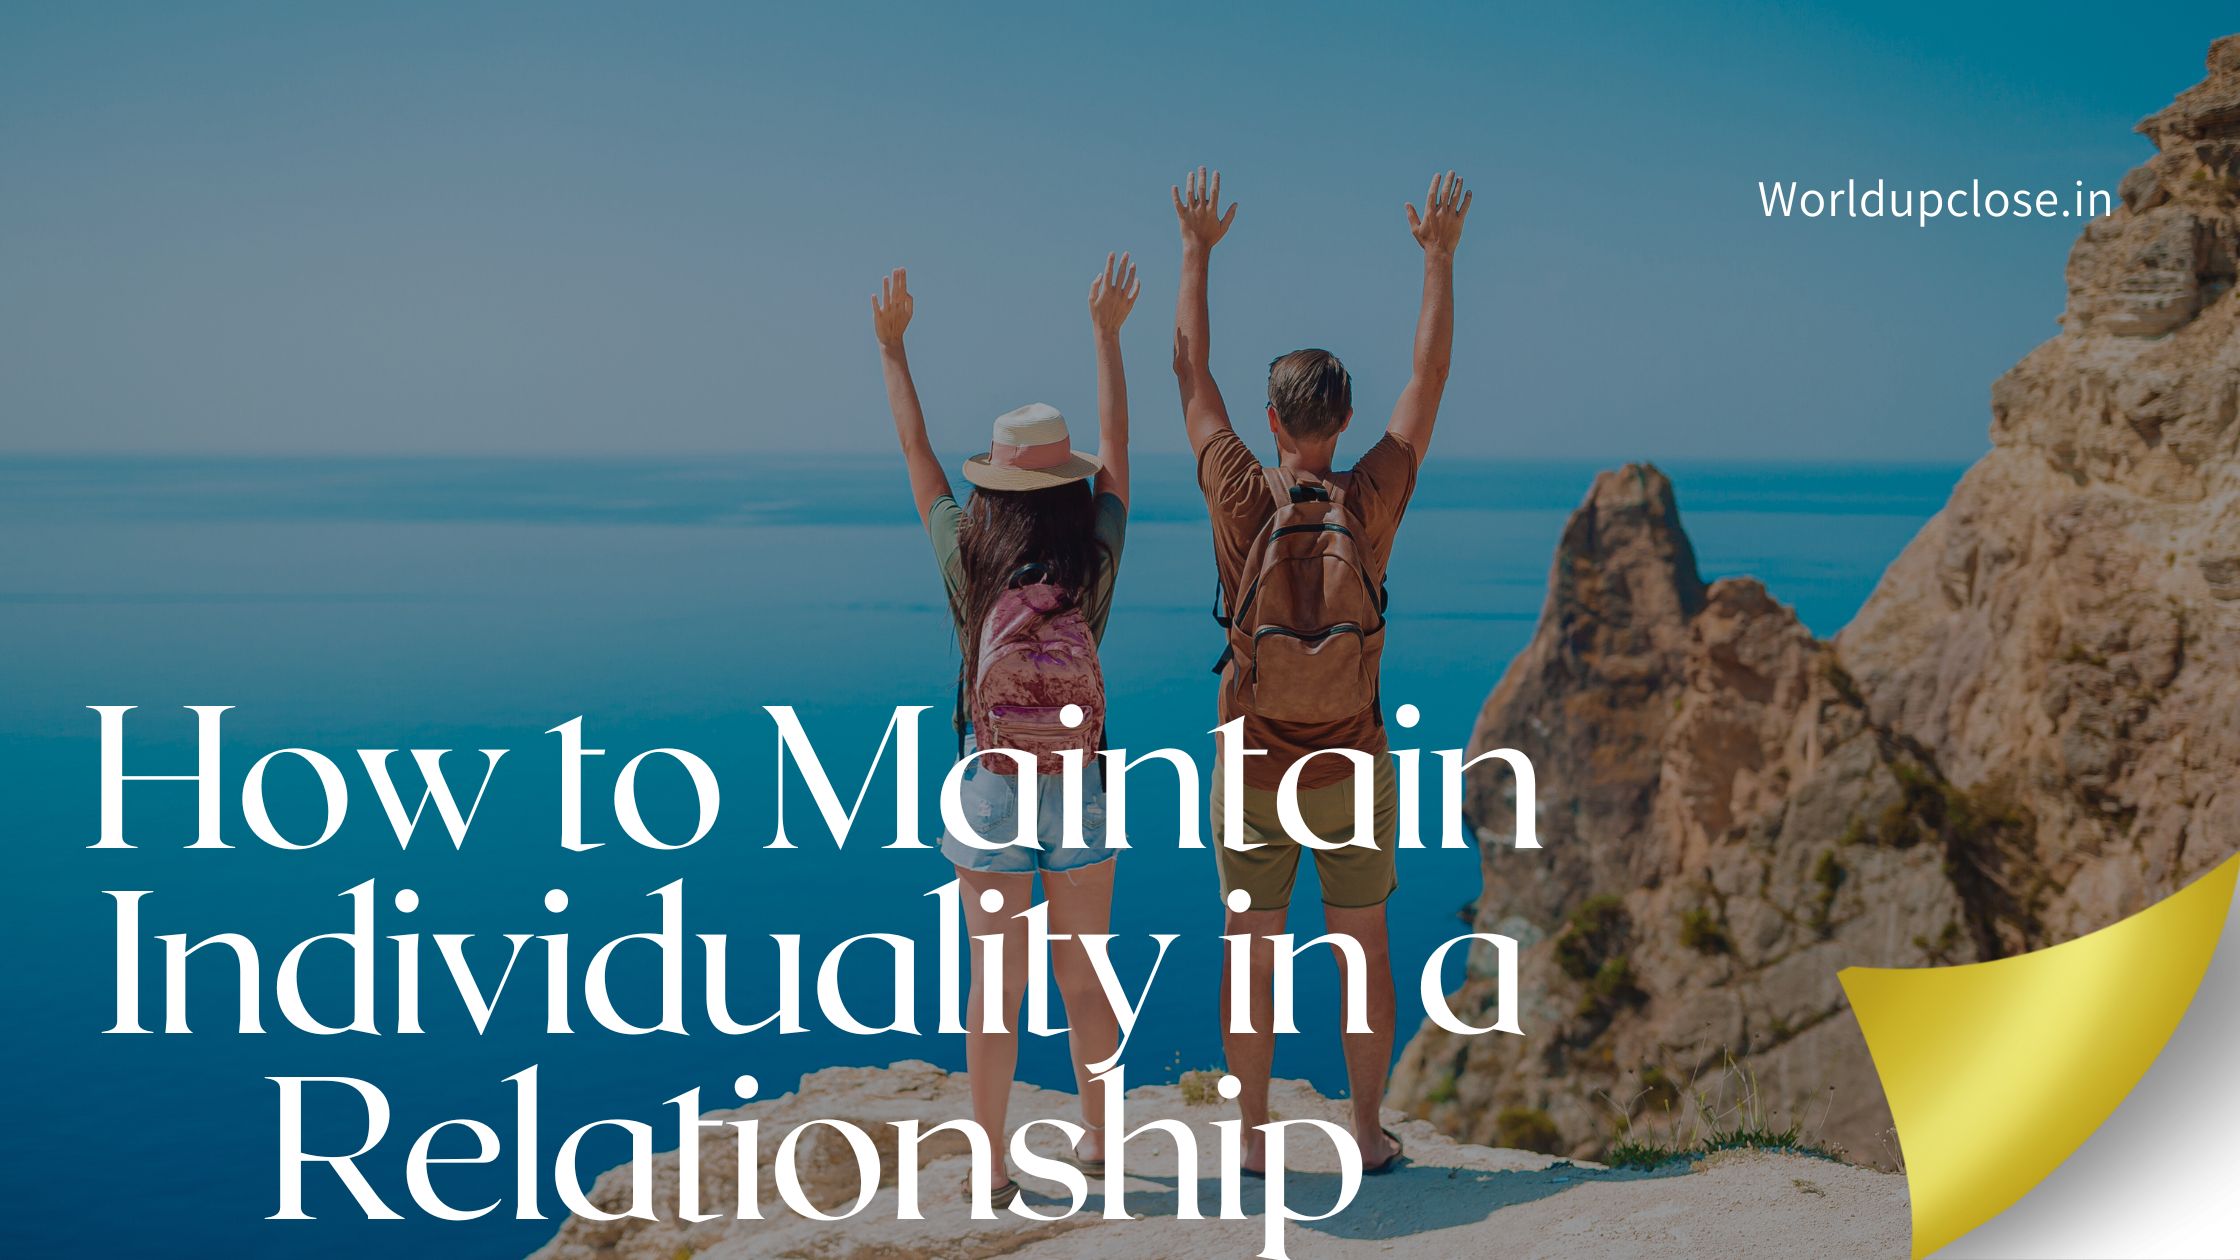 How to Maintain Individuality in a Relationship - 12 Successful Ways 22